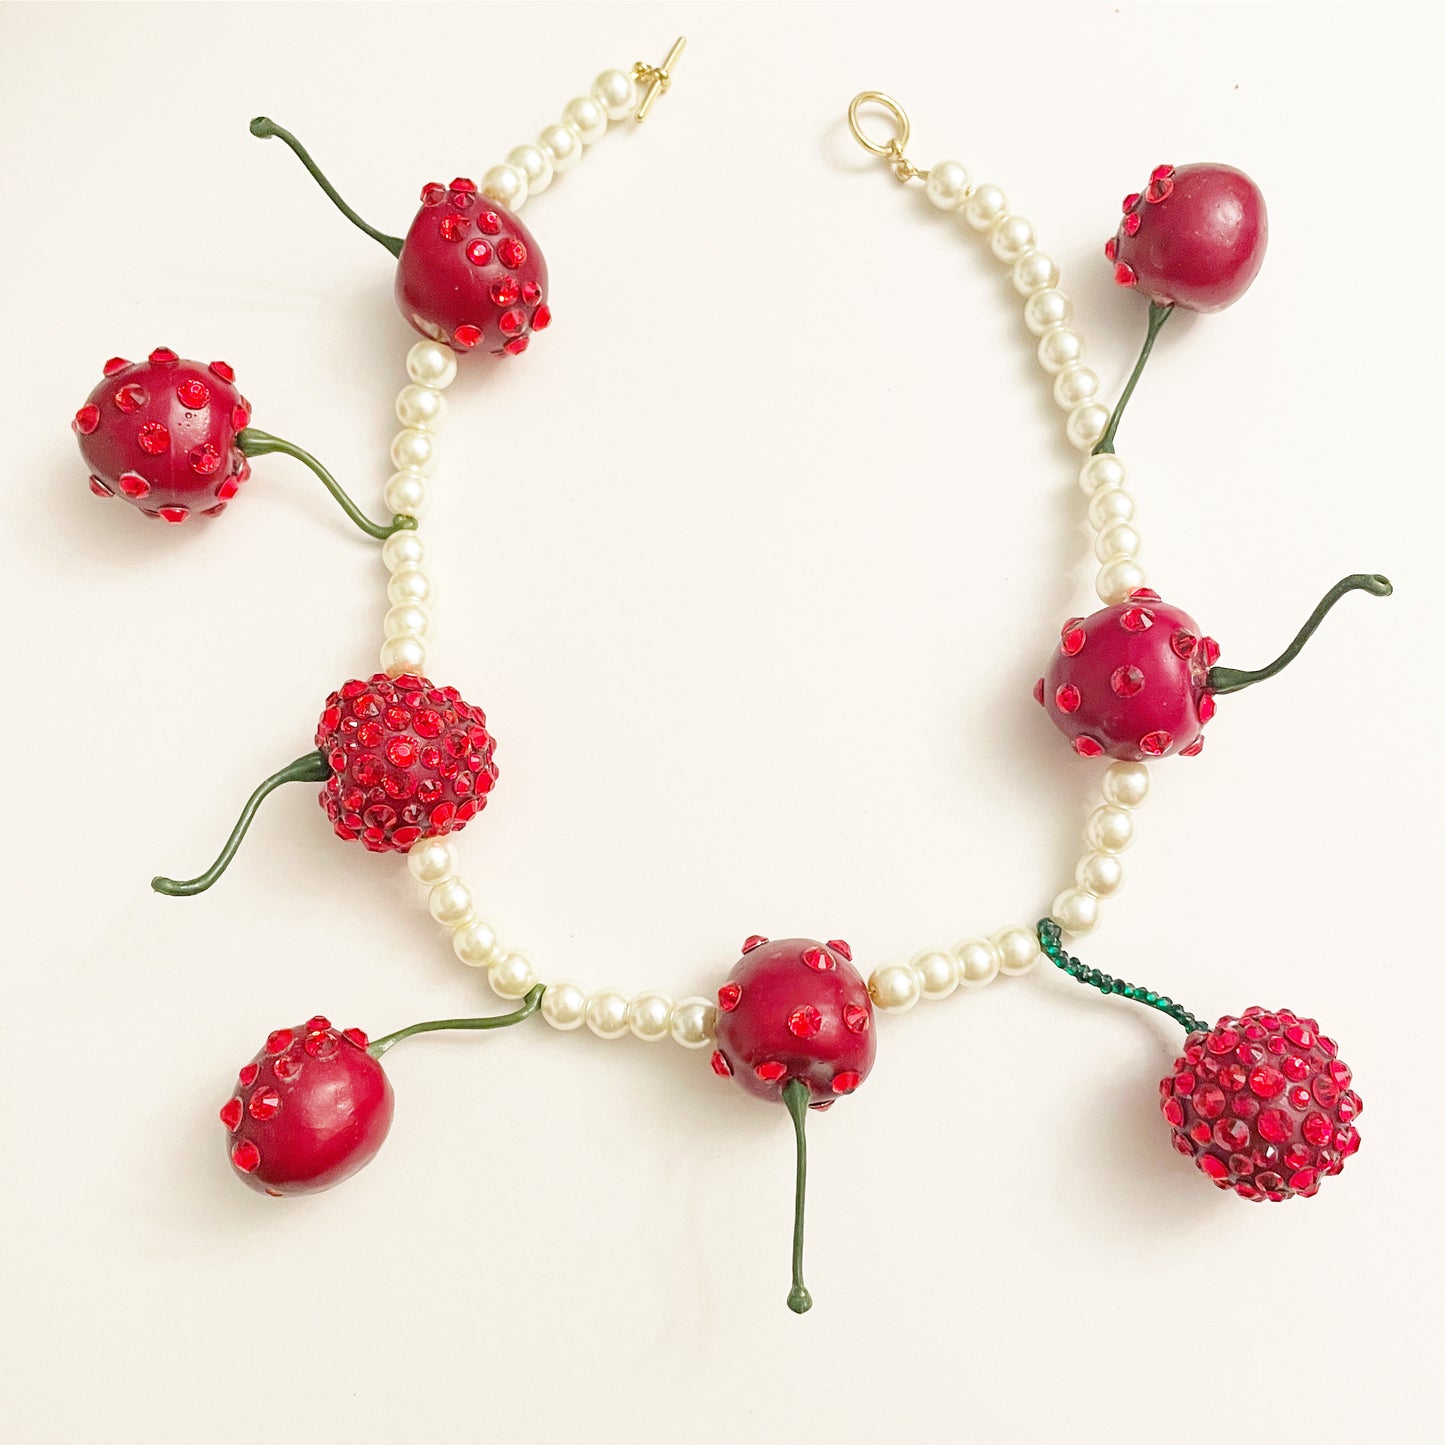 Cherry party necklace